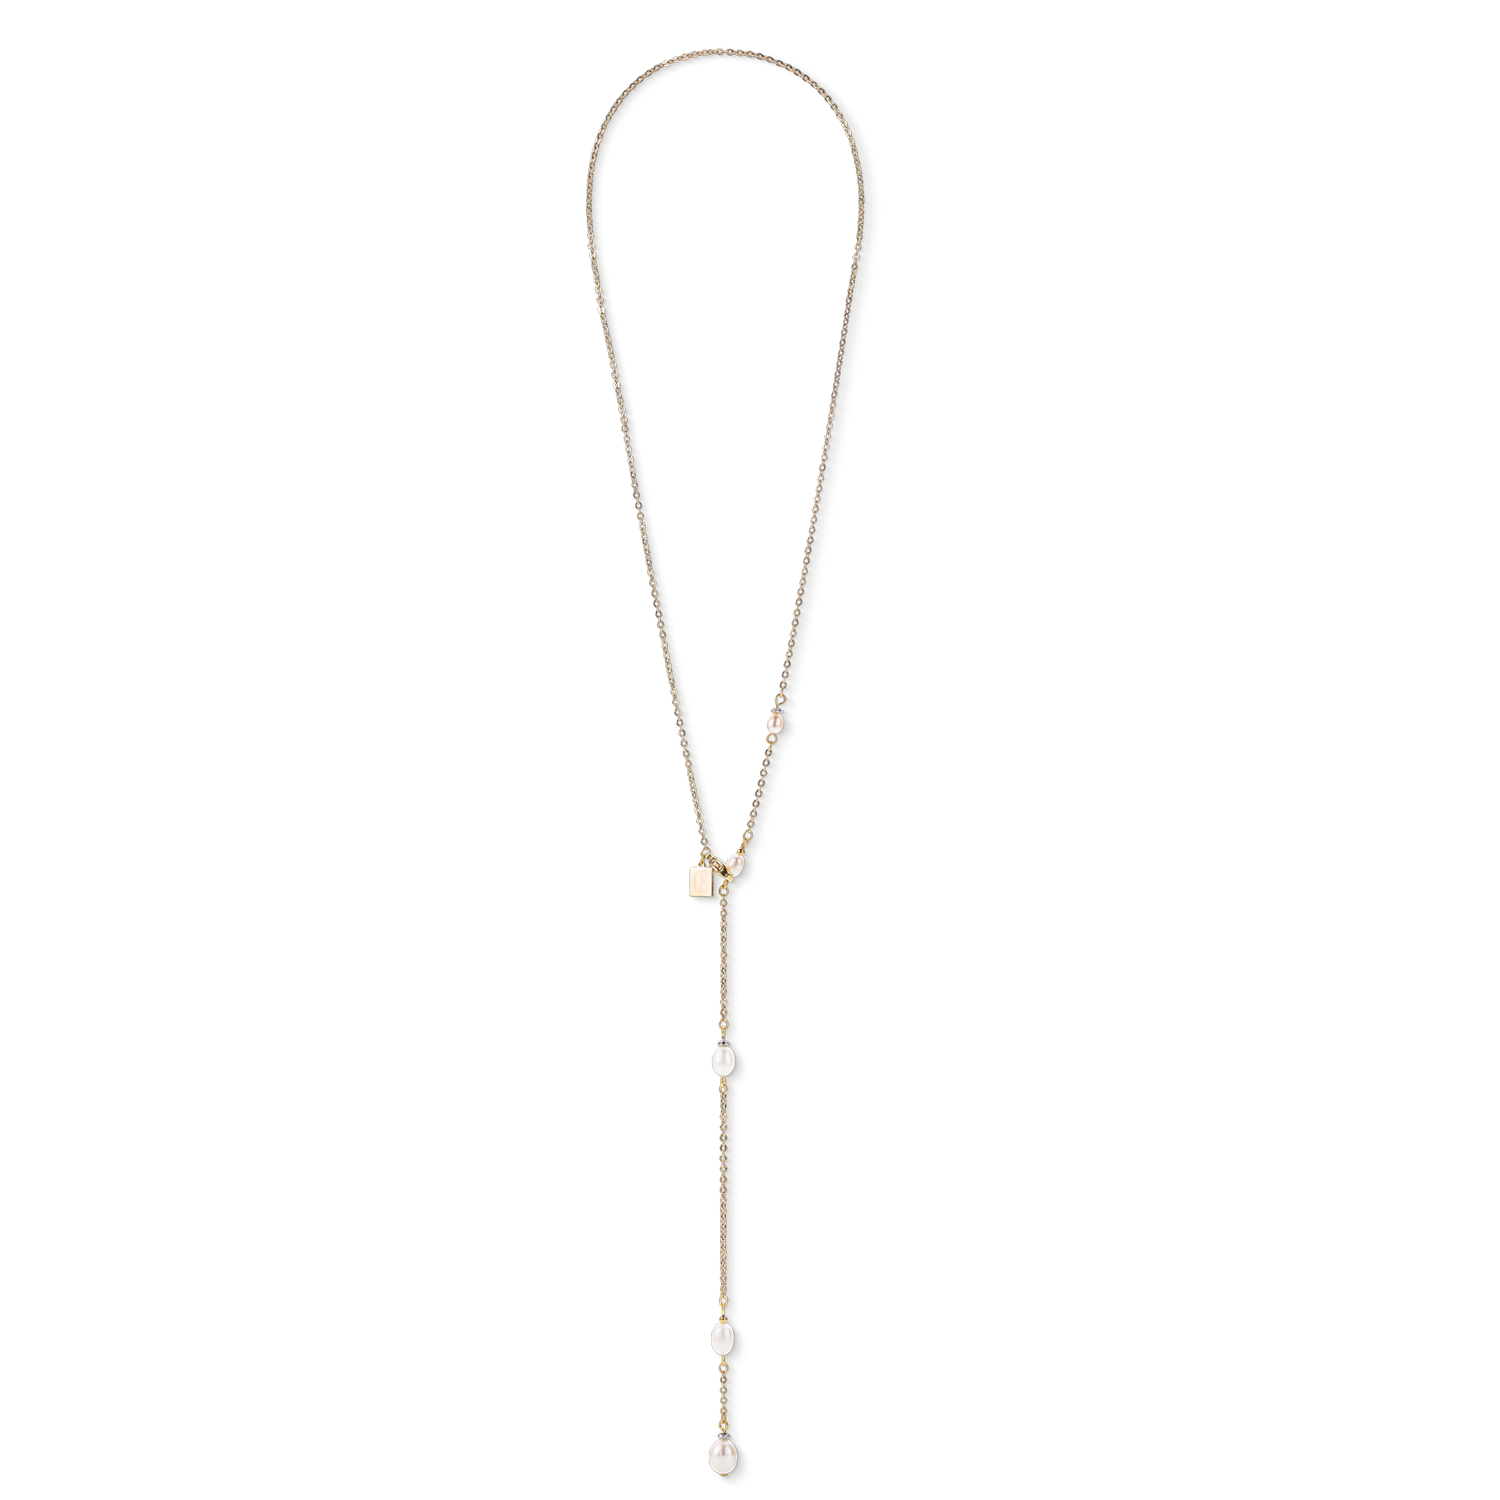 Necklace Y chain & oval Freshwater Pearls gold white